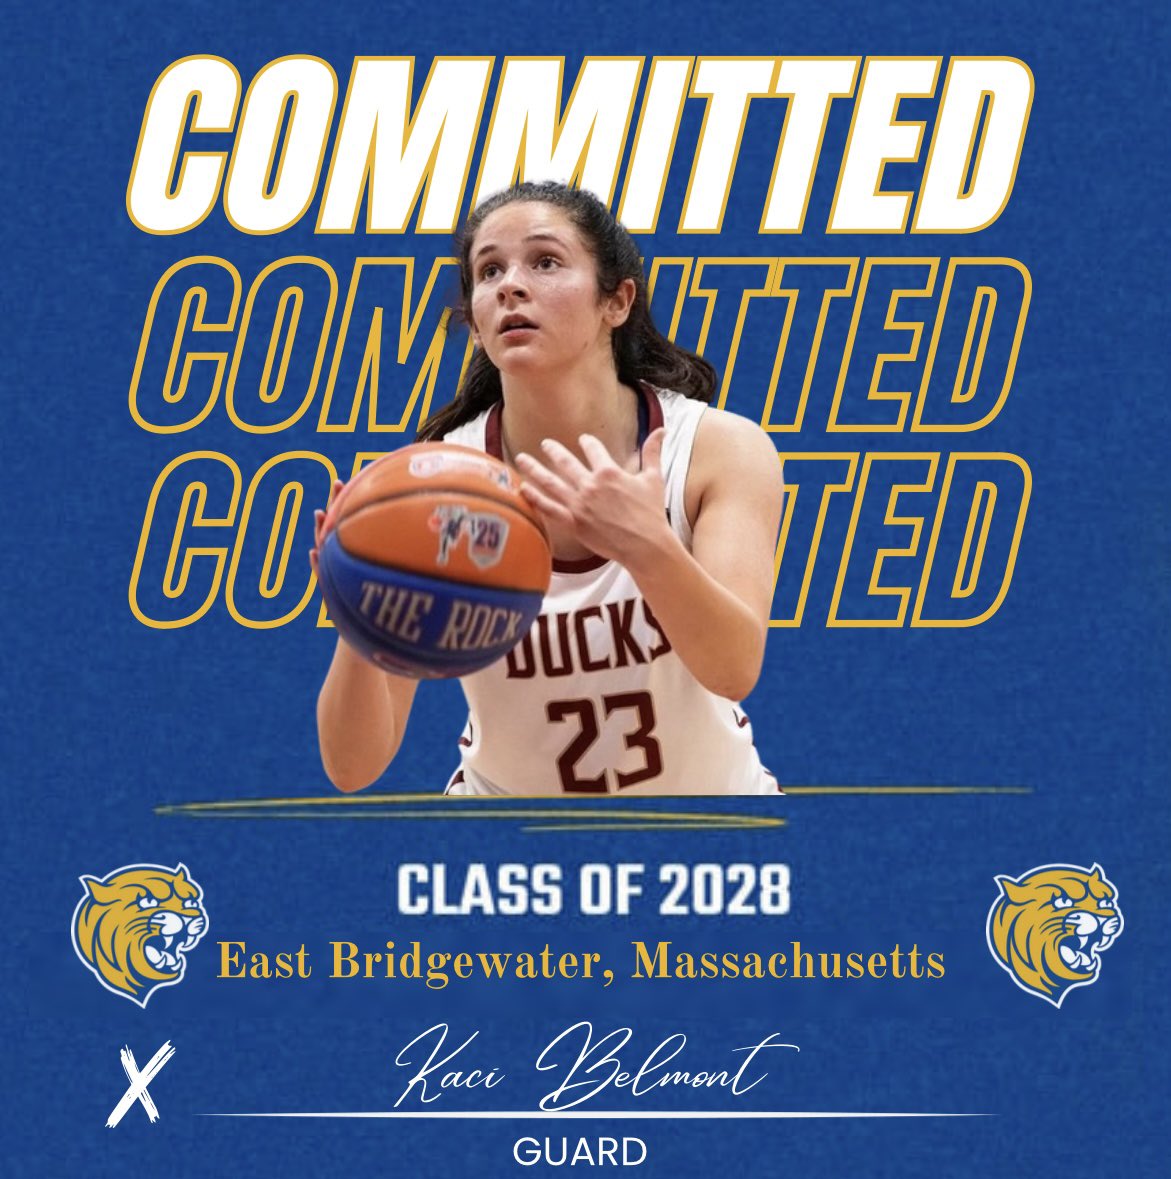 We are SO excited to start welcoming the newest members to the Wildcat Family this week! To start us off we have Kaci Belmont, from East Bridgewater, Massachusetts. Kaci played HS basketball for Cardinal Spellman and AAU for the @MTEliteDucks Welcome to the family Kaci 💙💛